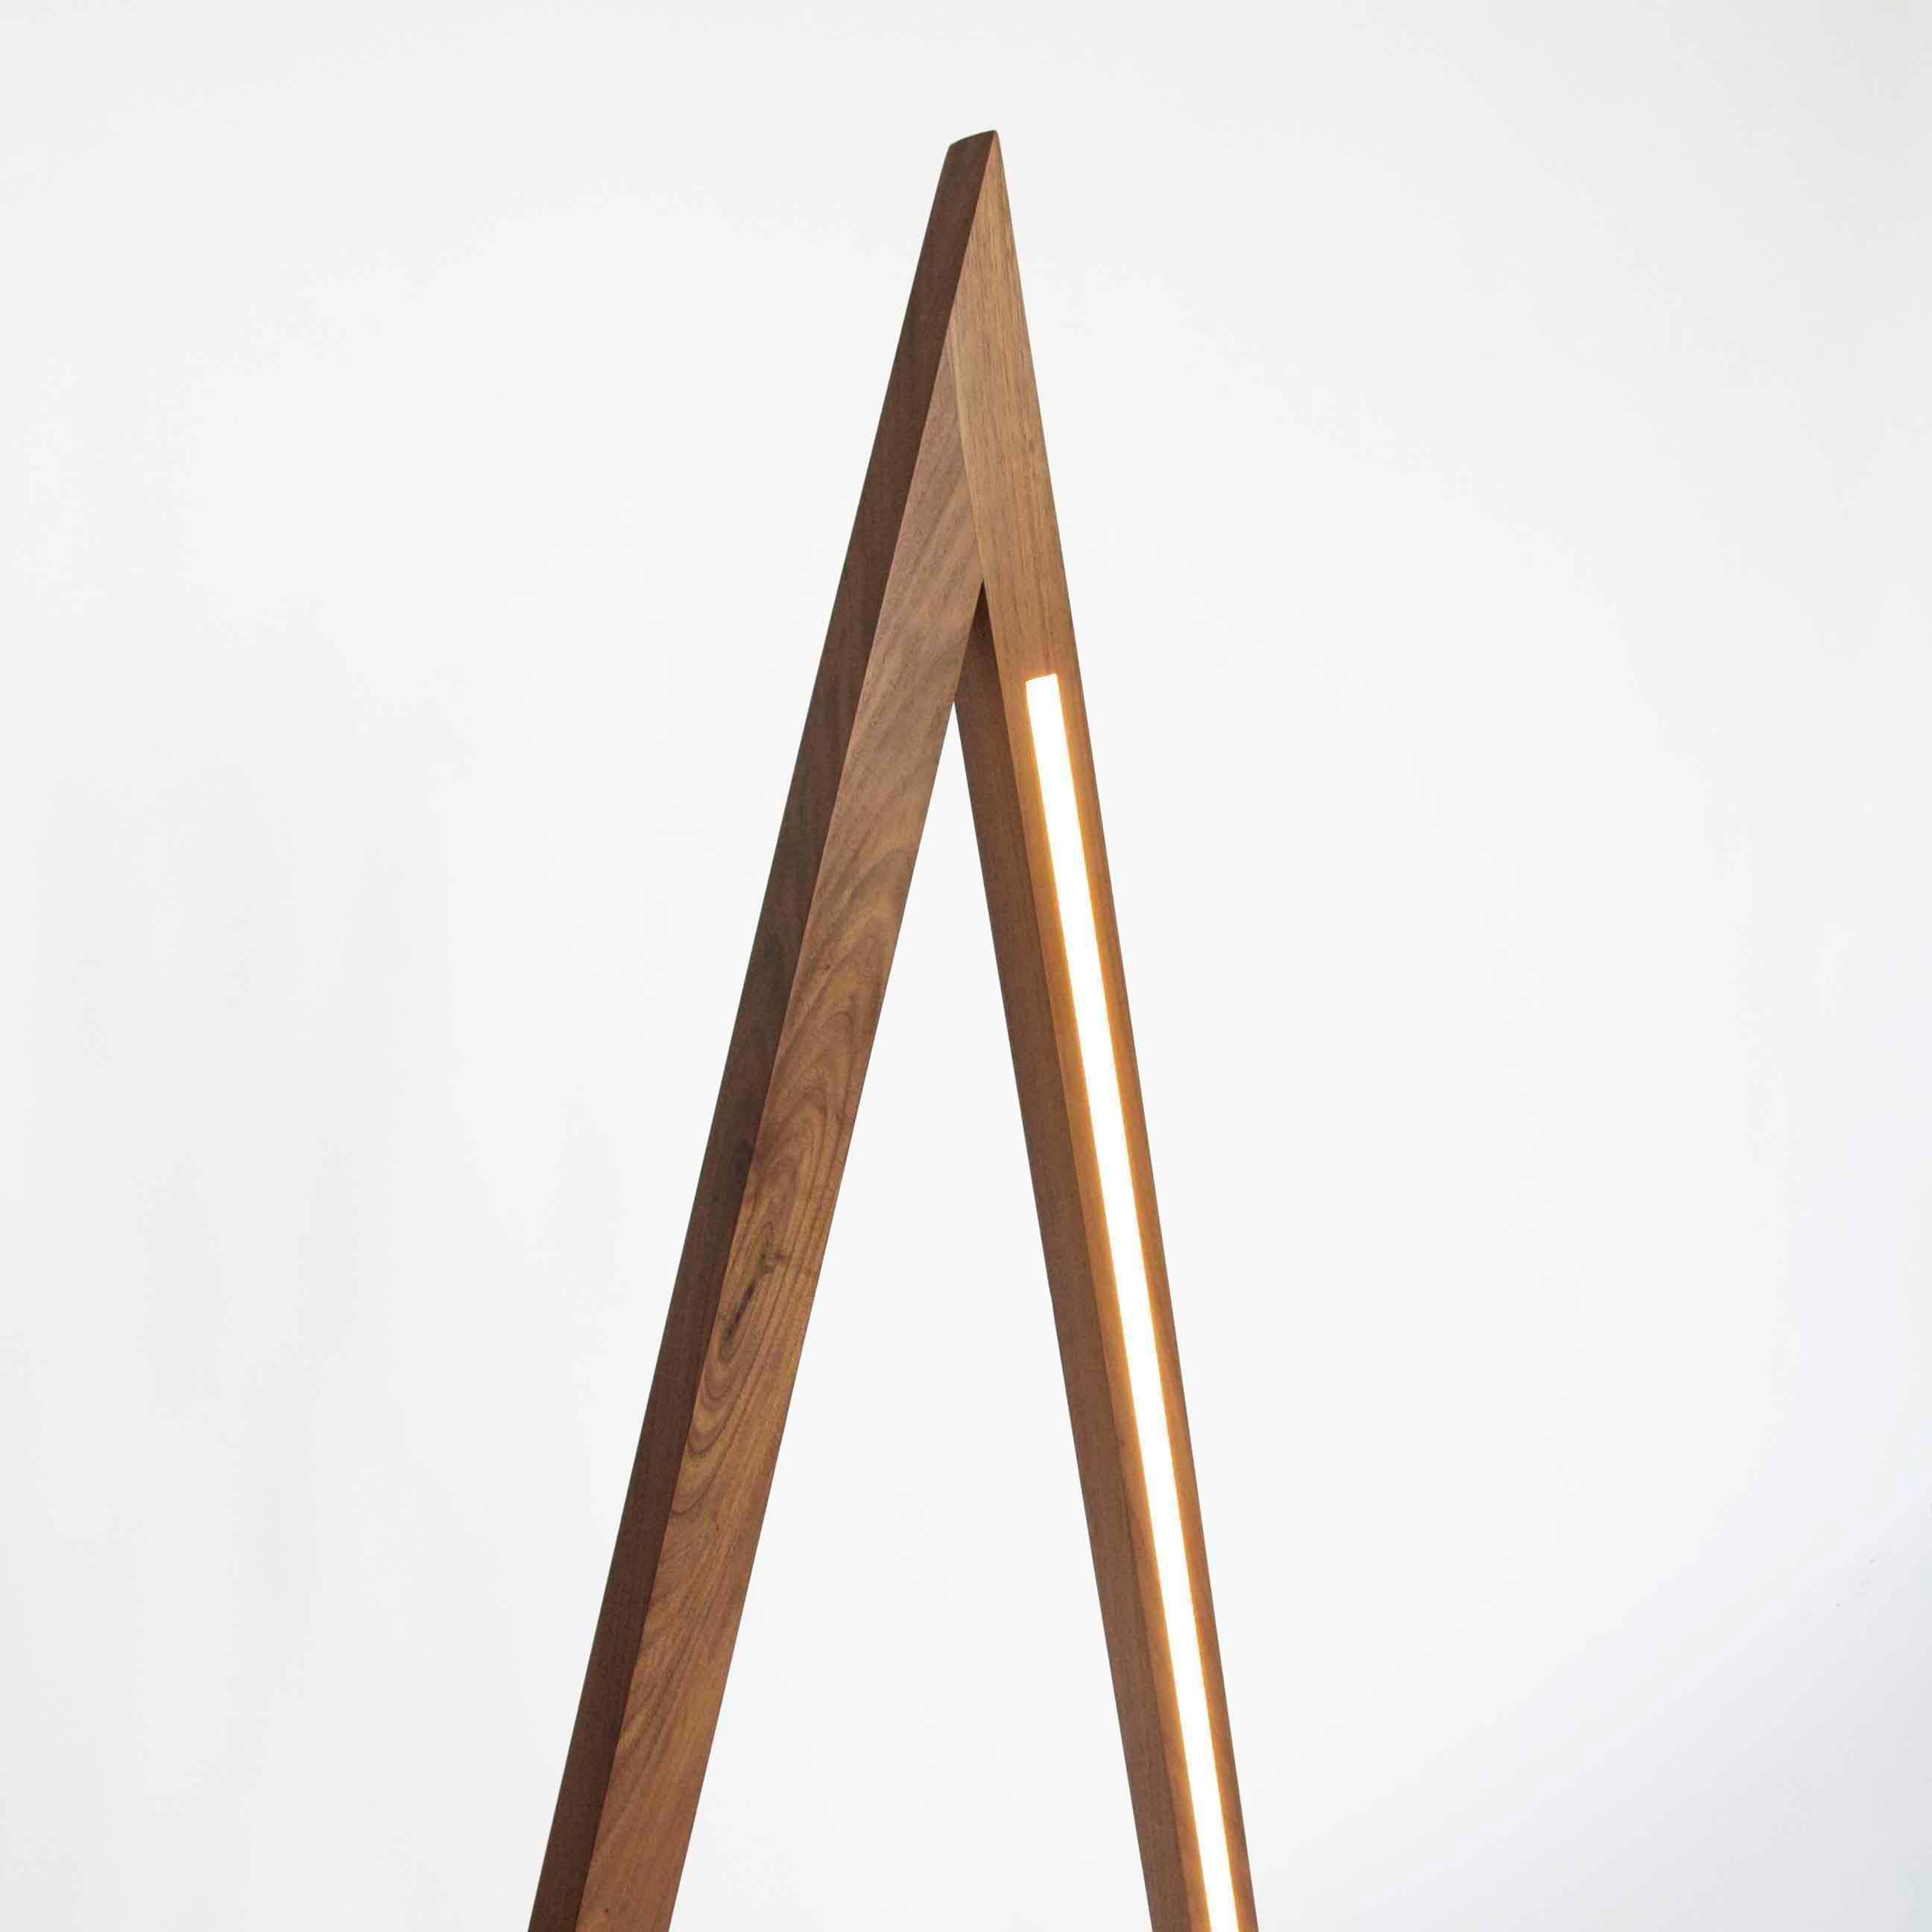 Fort Makers' Tall Skinny Triangle Walnut Line Light is made in Brooklyn by Noah Spencer. This sculptural LED light juxtaposes hard lines with soft reflected light and emits an ambient aura. The lifespan of an LED strip is approximately 50,000